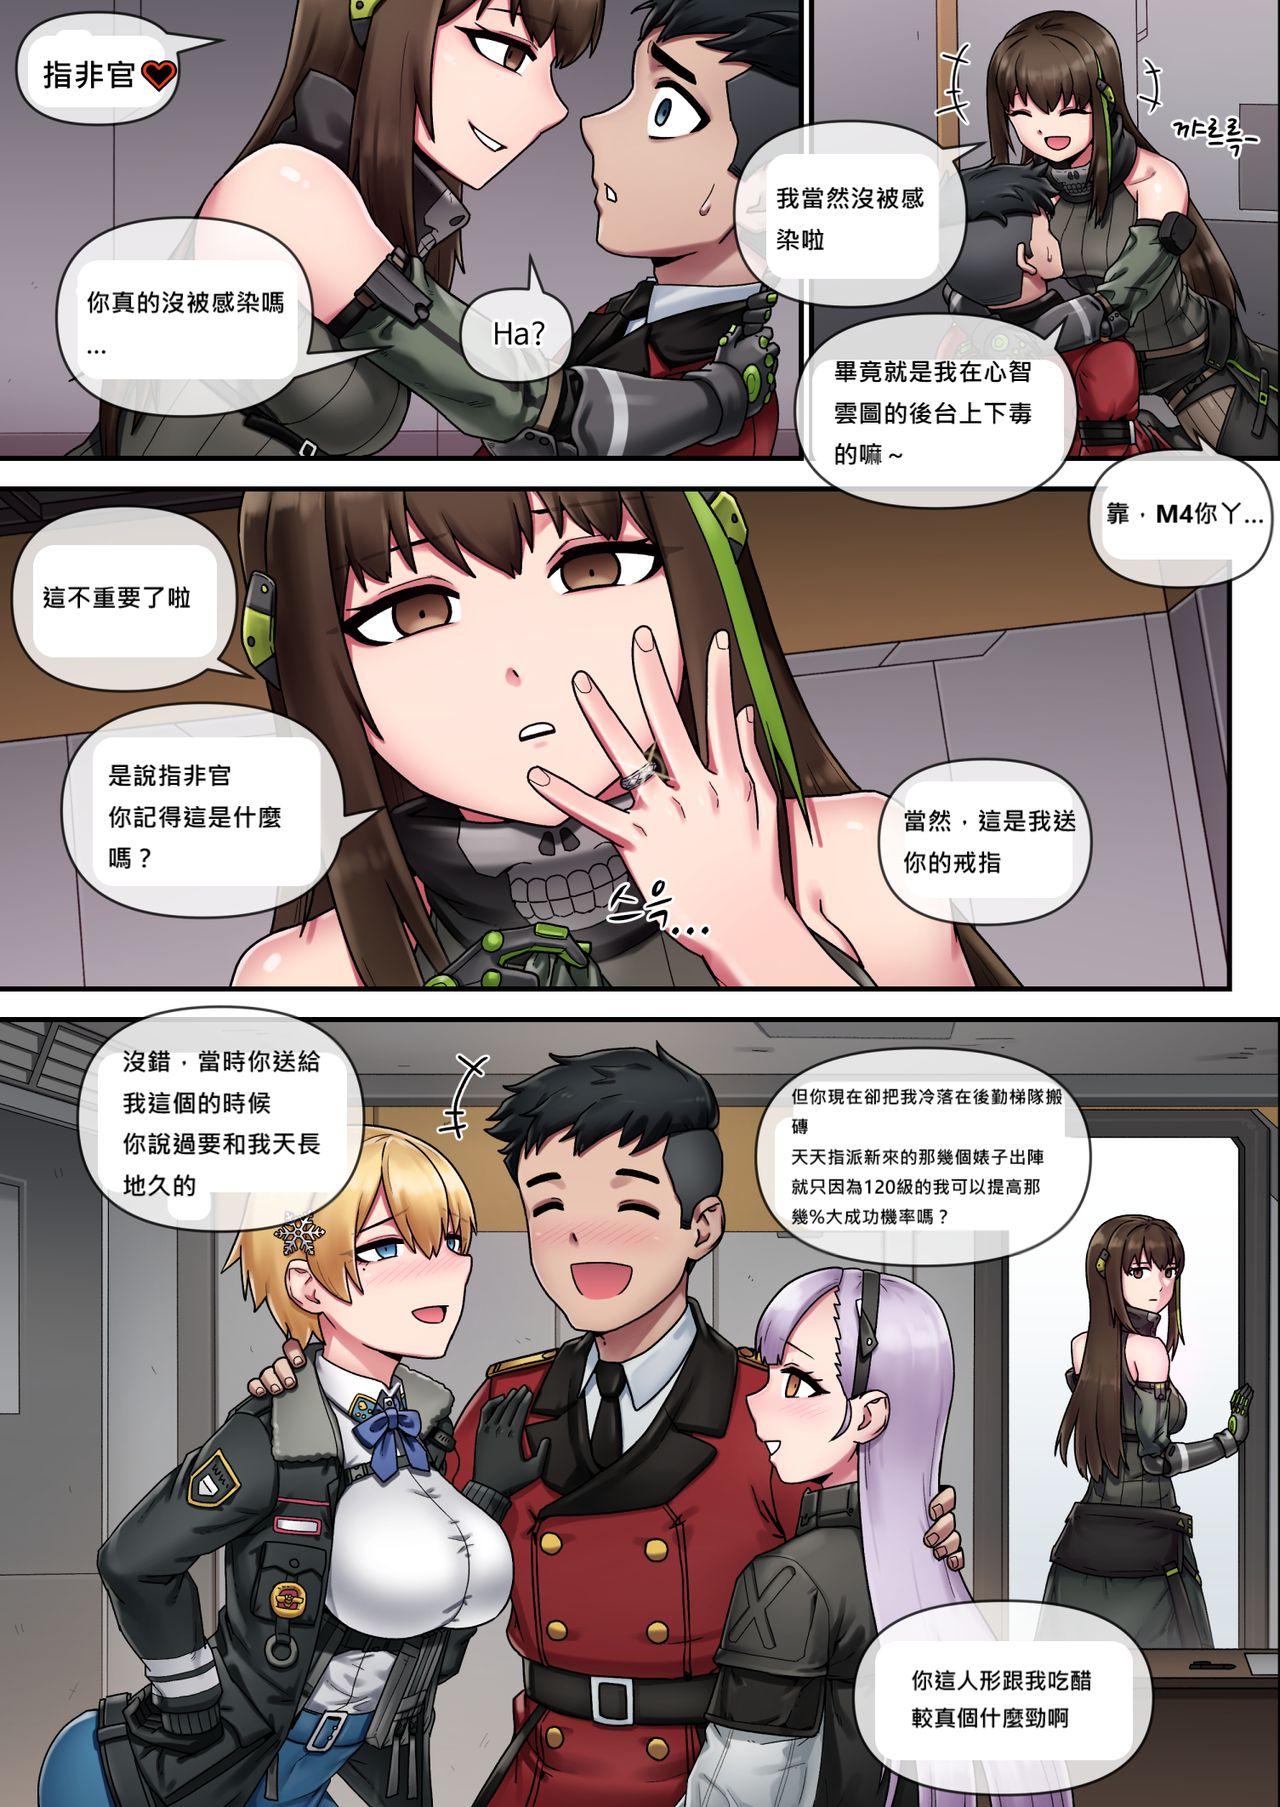 Aunty My Only Princess - Girls frontline Morrita - Page 8